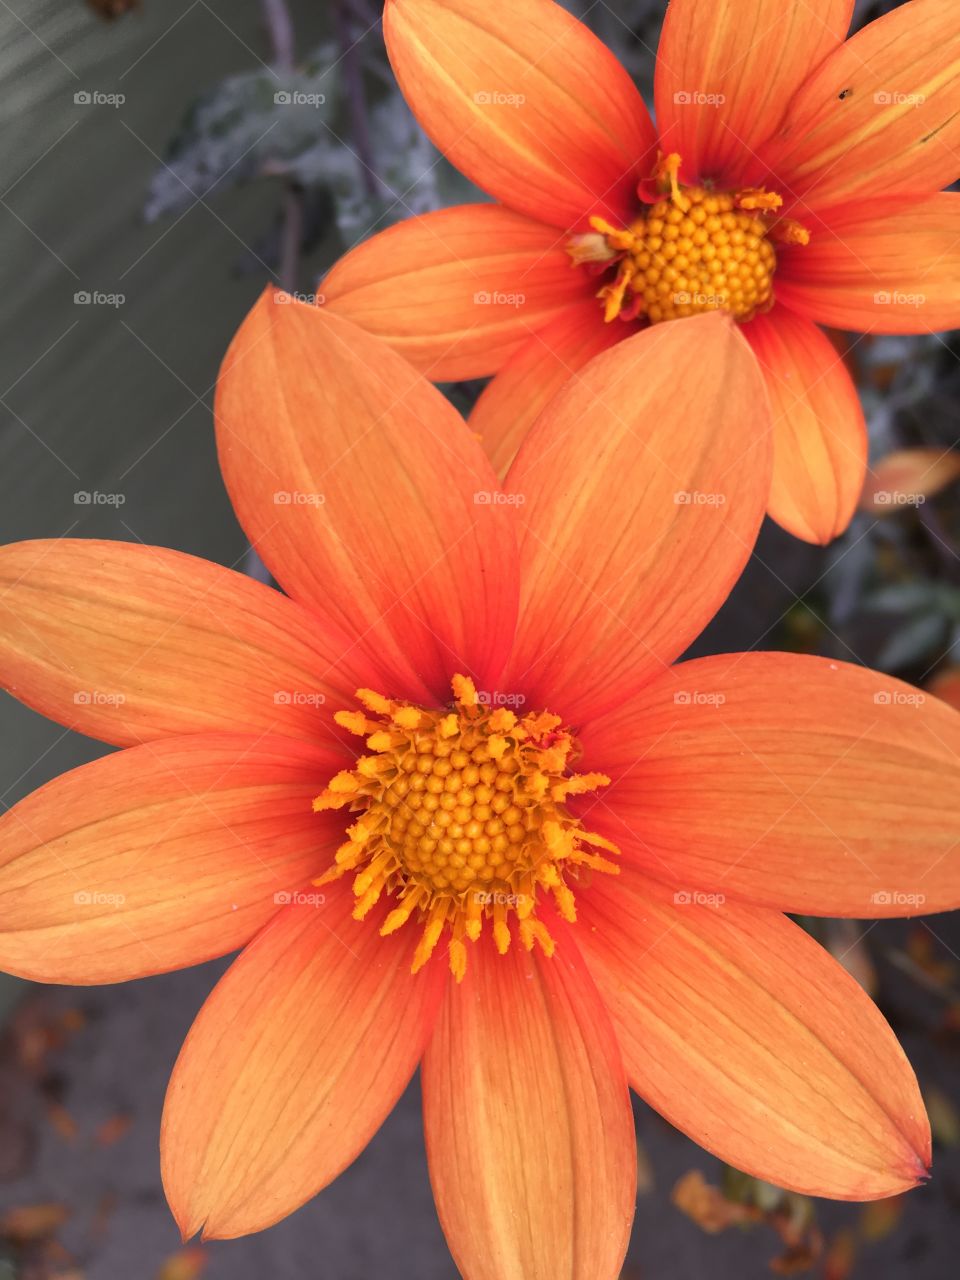 Two bright orange and yellow flowers